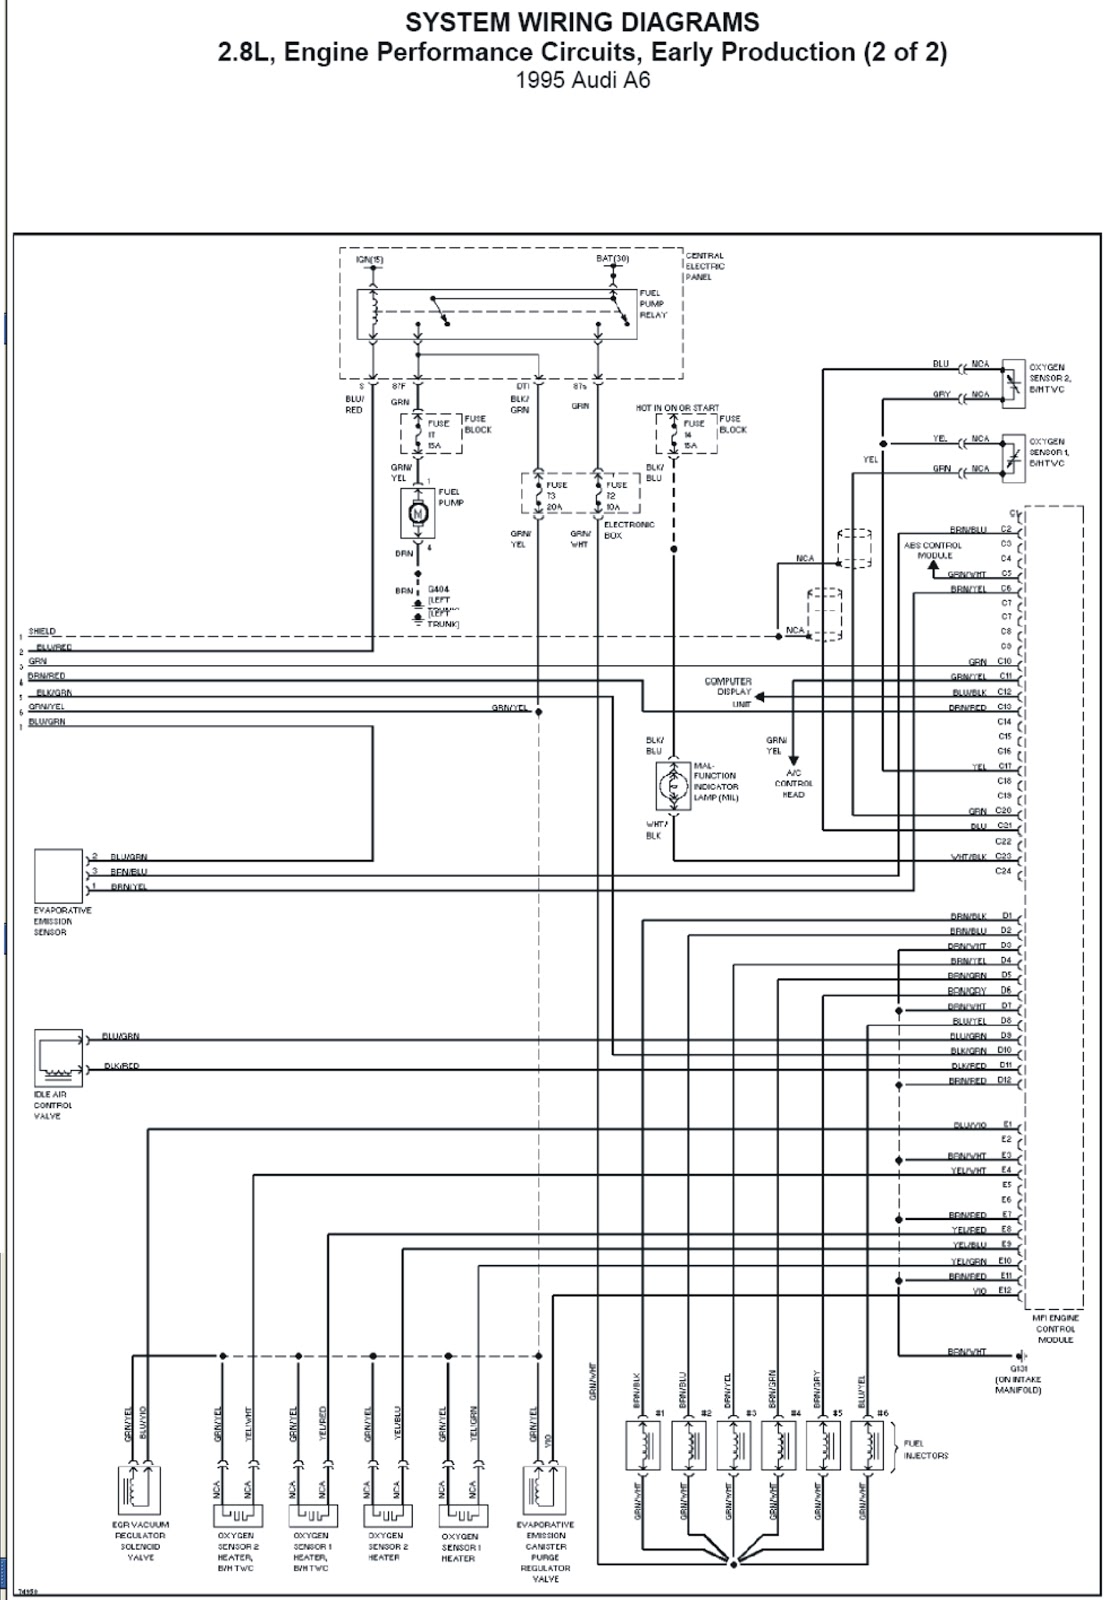 1996 Audi A6 Engine  law Circuits Wiring Diagrams  